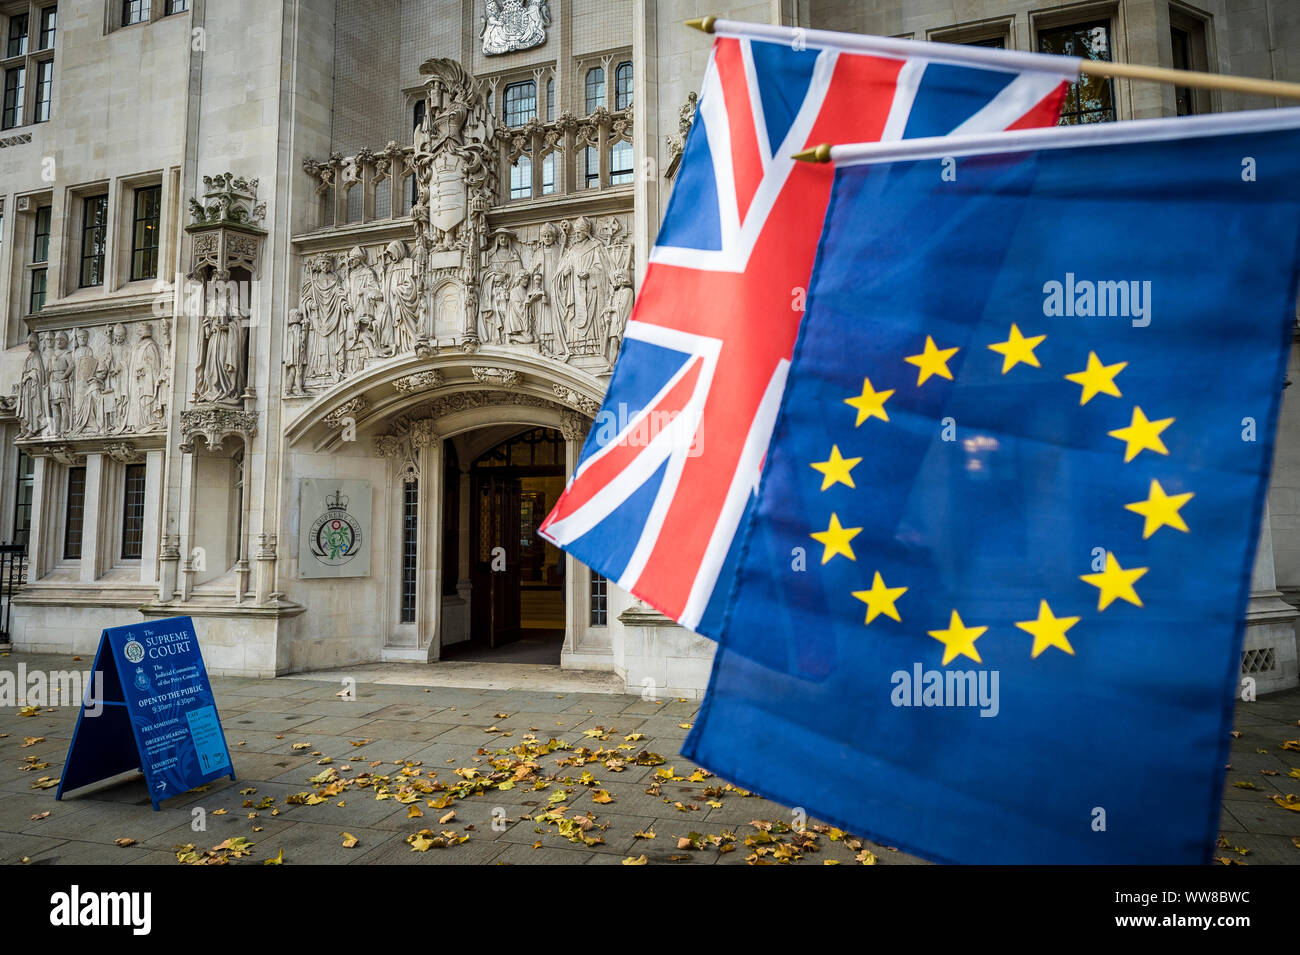 LONDON - DECEMBER 5, 2016: EU and UK flags hang outside the Supreme Court of the United Kingdom in Parliament Square. Stock Photo